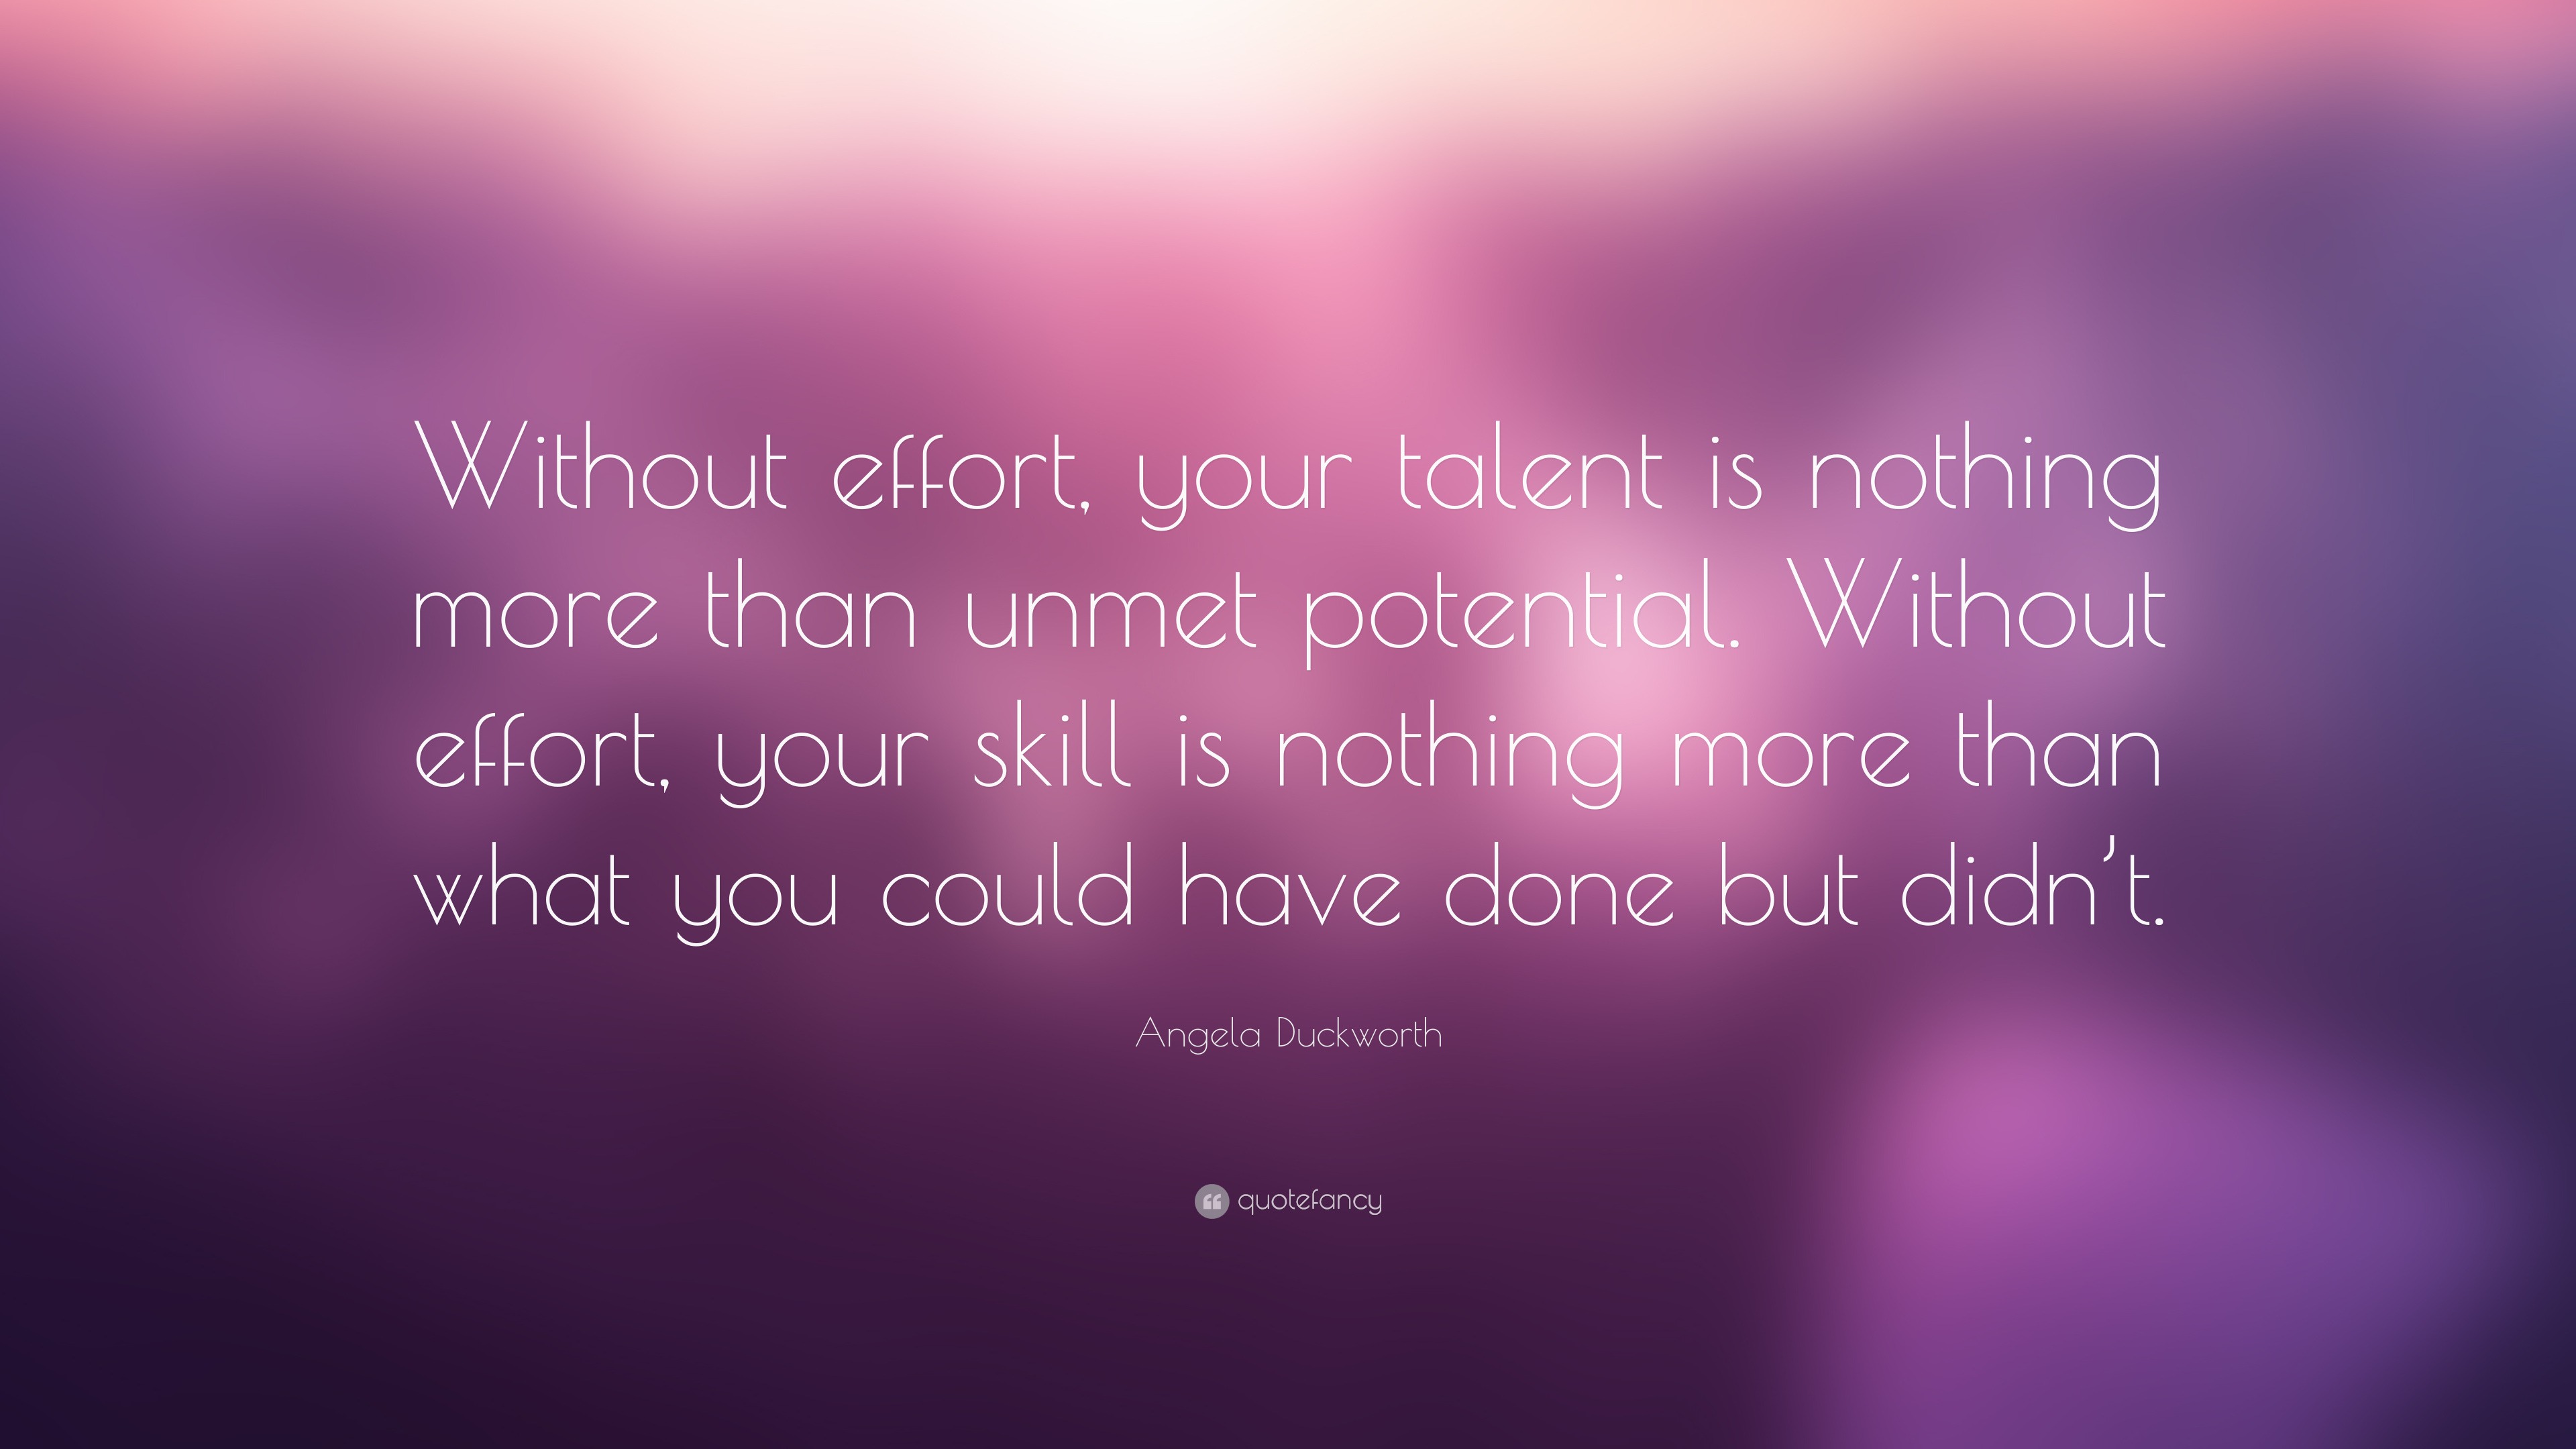 Angela Duckworth Quote: “Without effort, your talent is nothing more ...